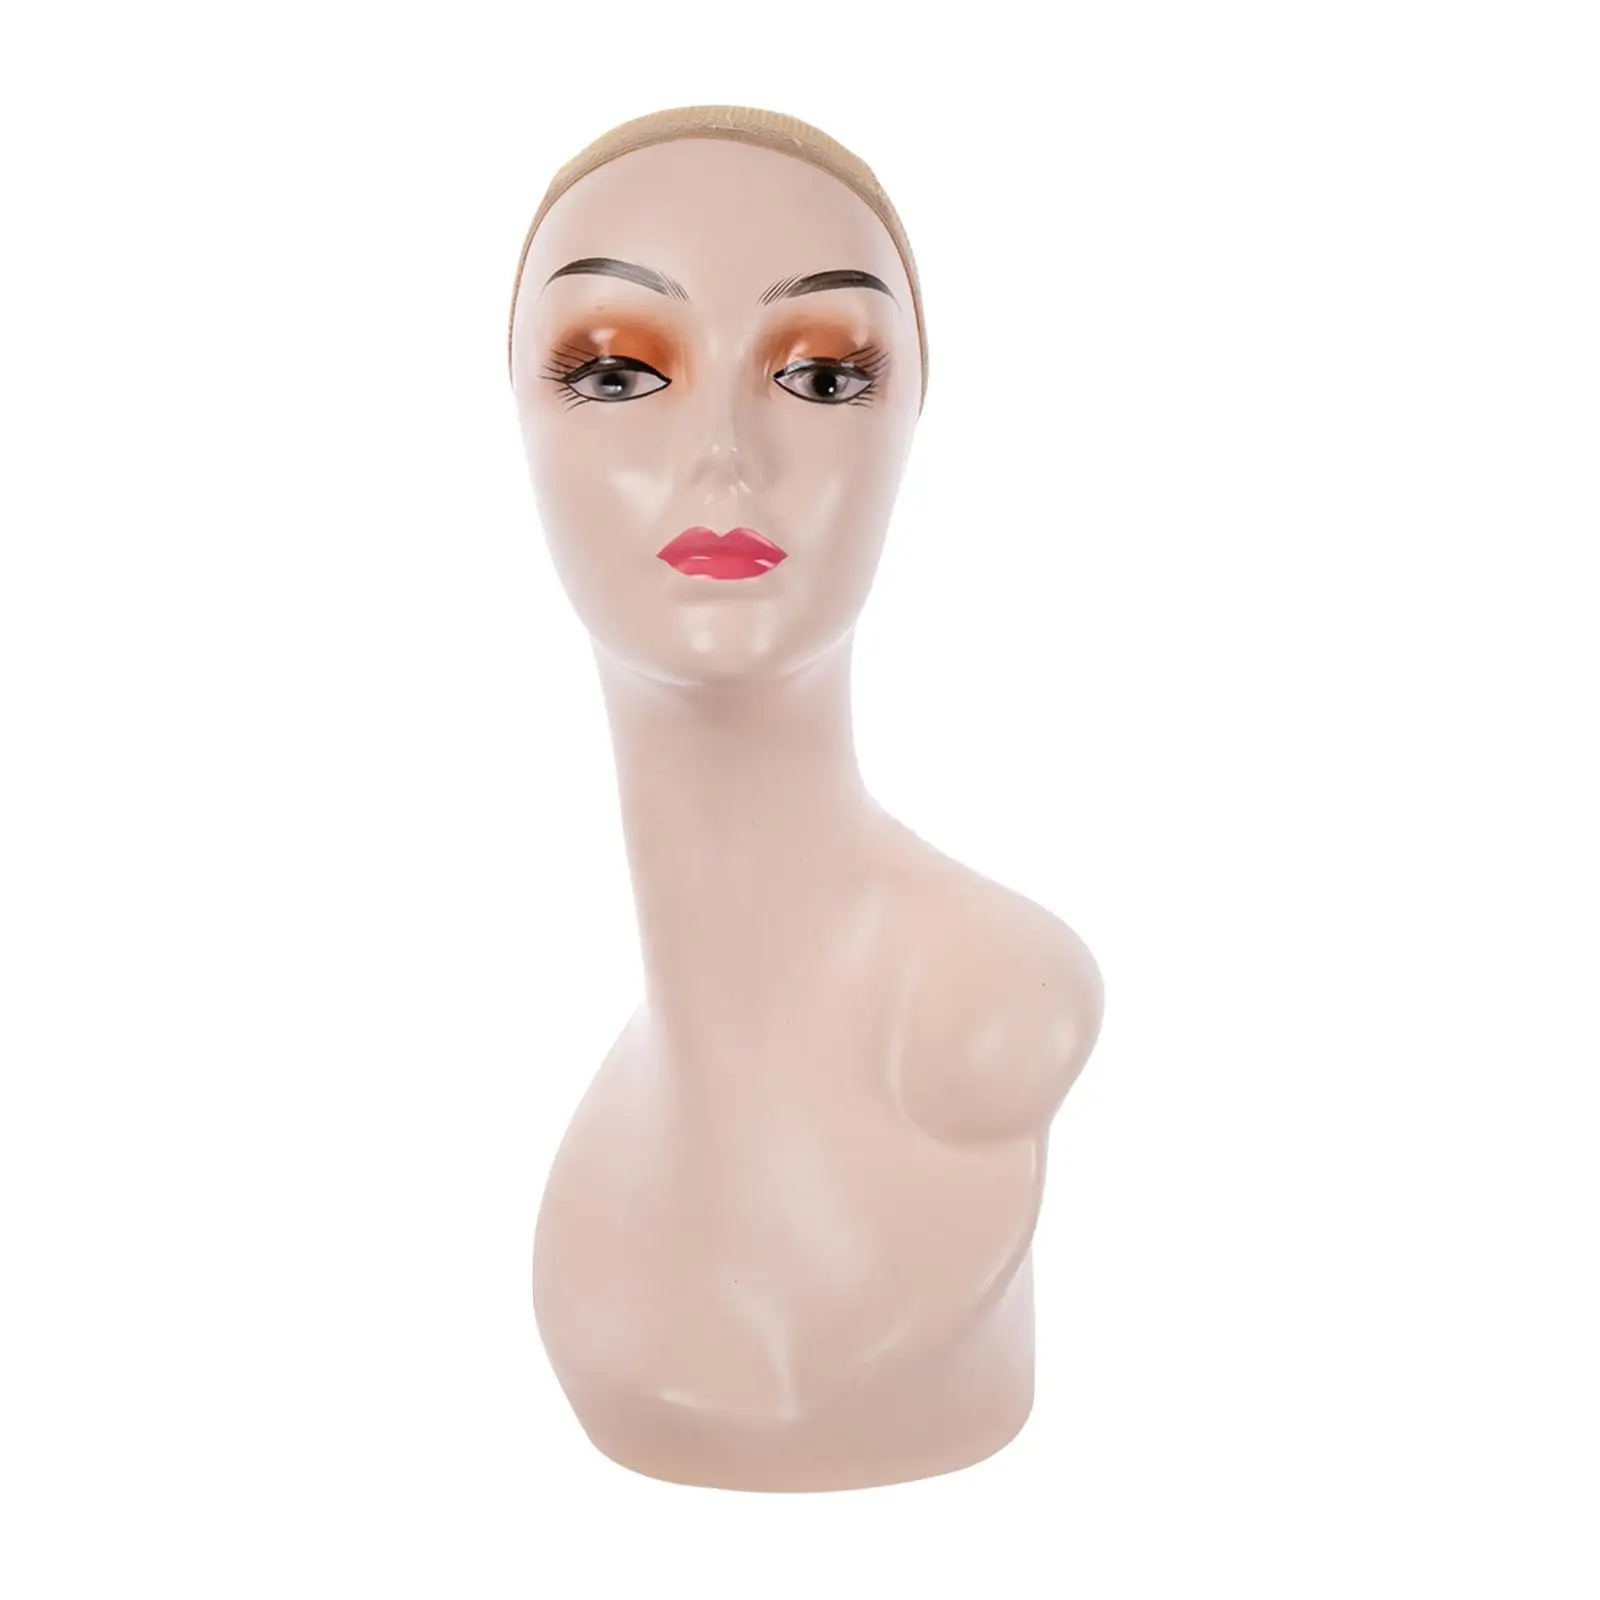 Female Bald Mannequin Head Smooth Manikin for Wigs Displaying Making Styling